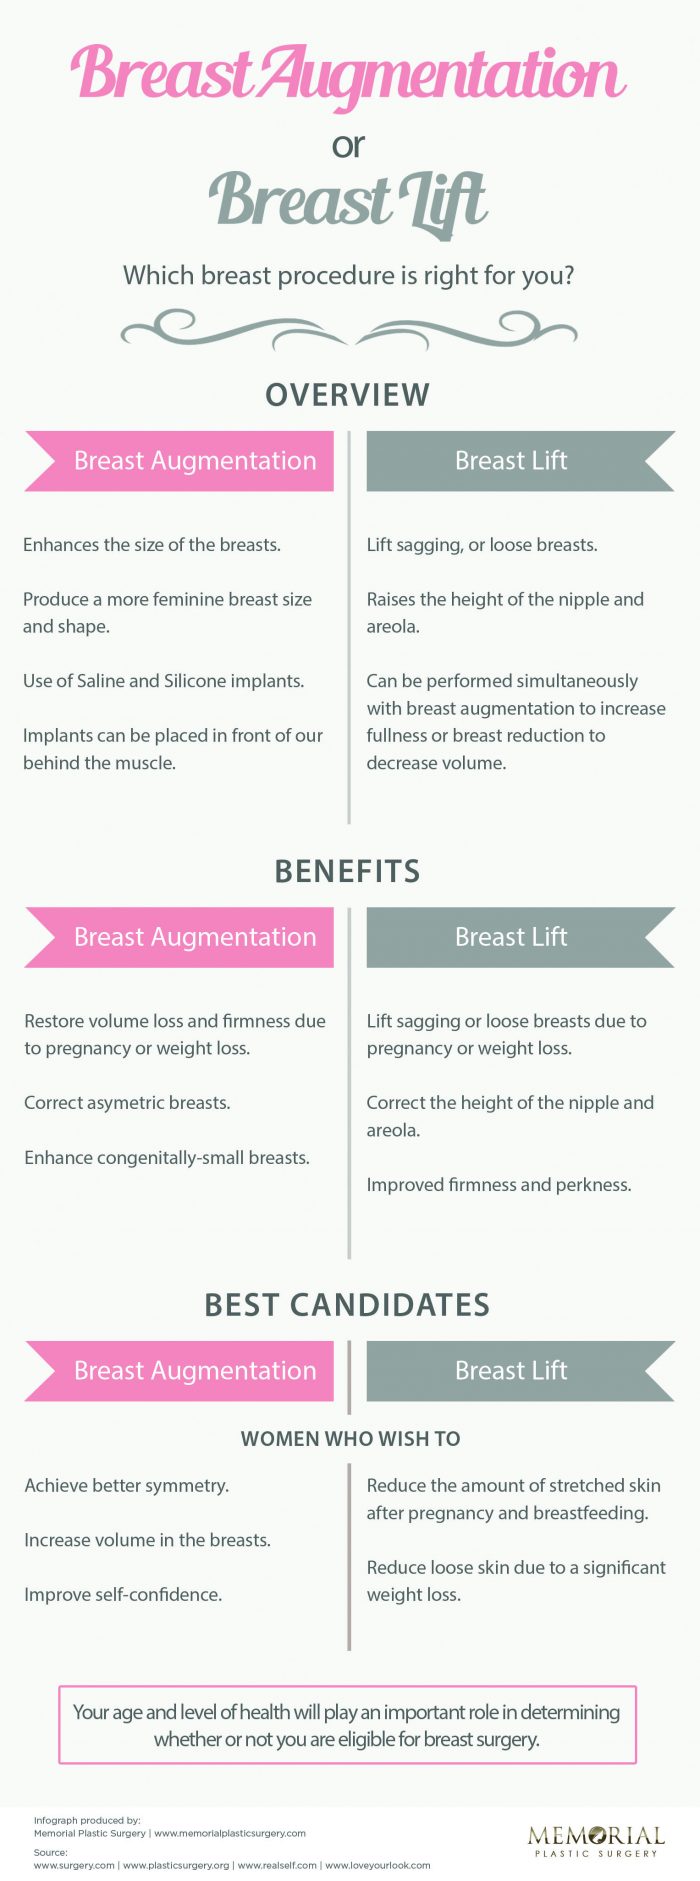 Breast Lift vs. Breast Augmentation: Which one is right for you?